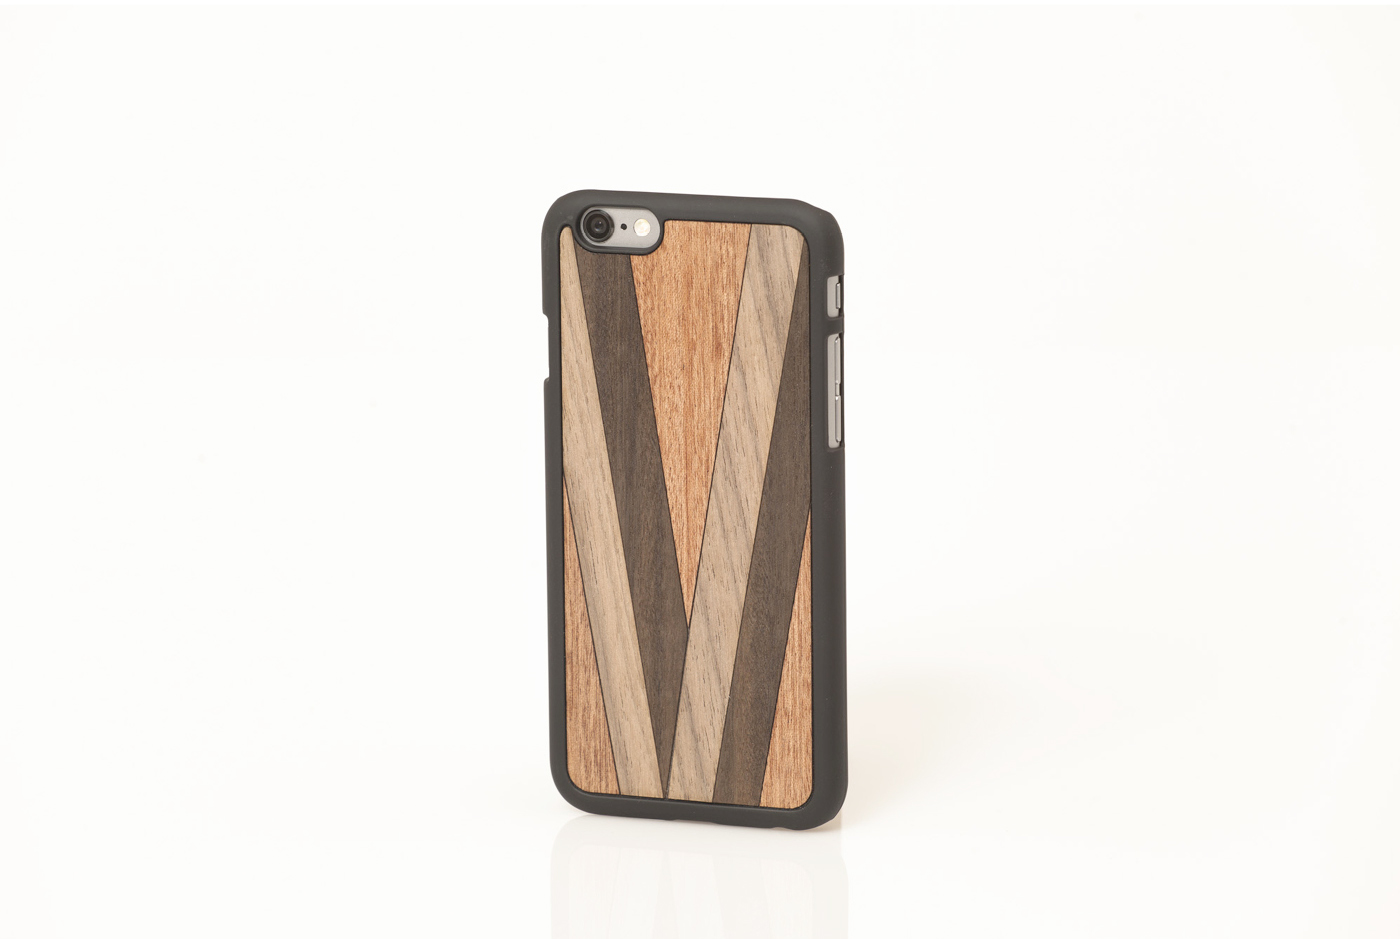 Adobe Portfolio cover wood wooden iphone wood'd accessories